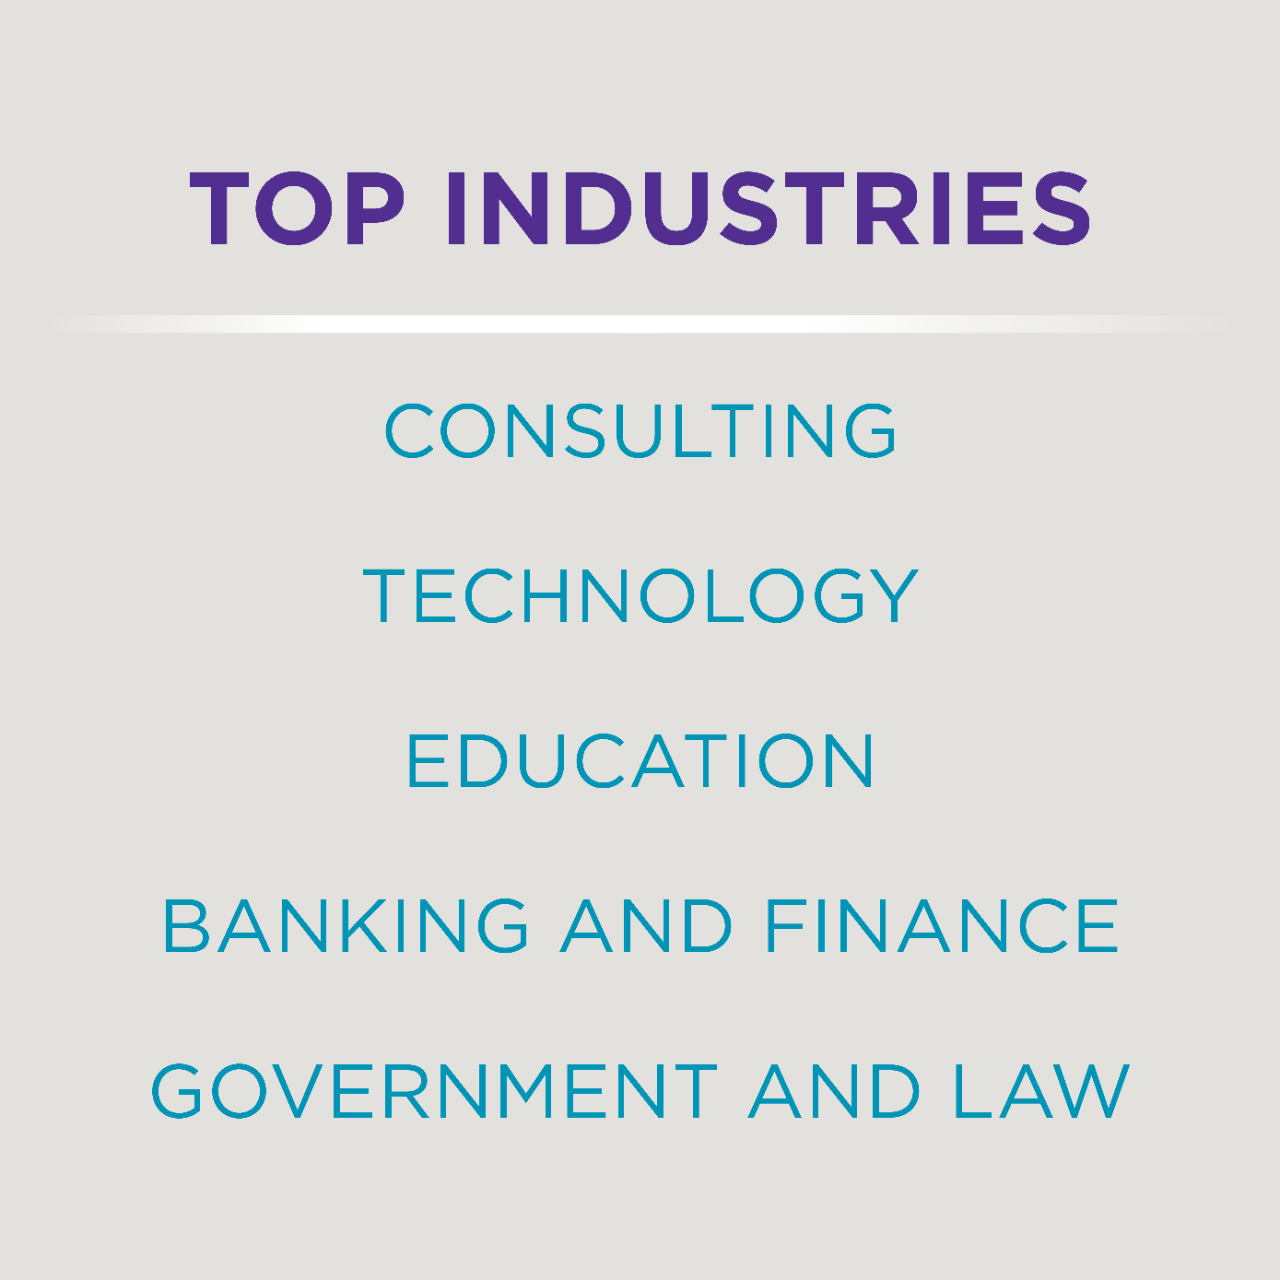 Top industries: consulting, technology, education, banking and finance, government and law.